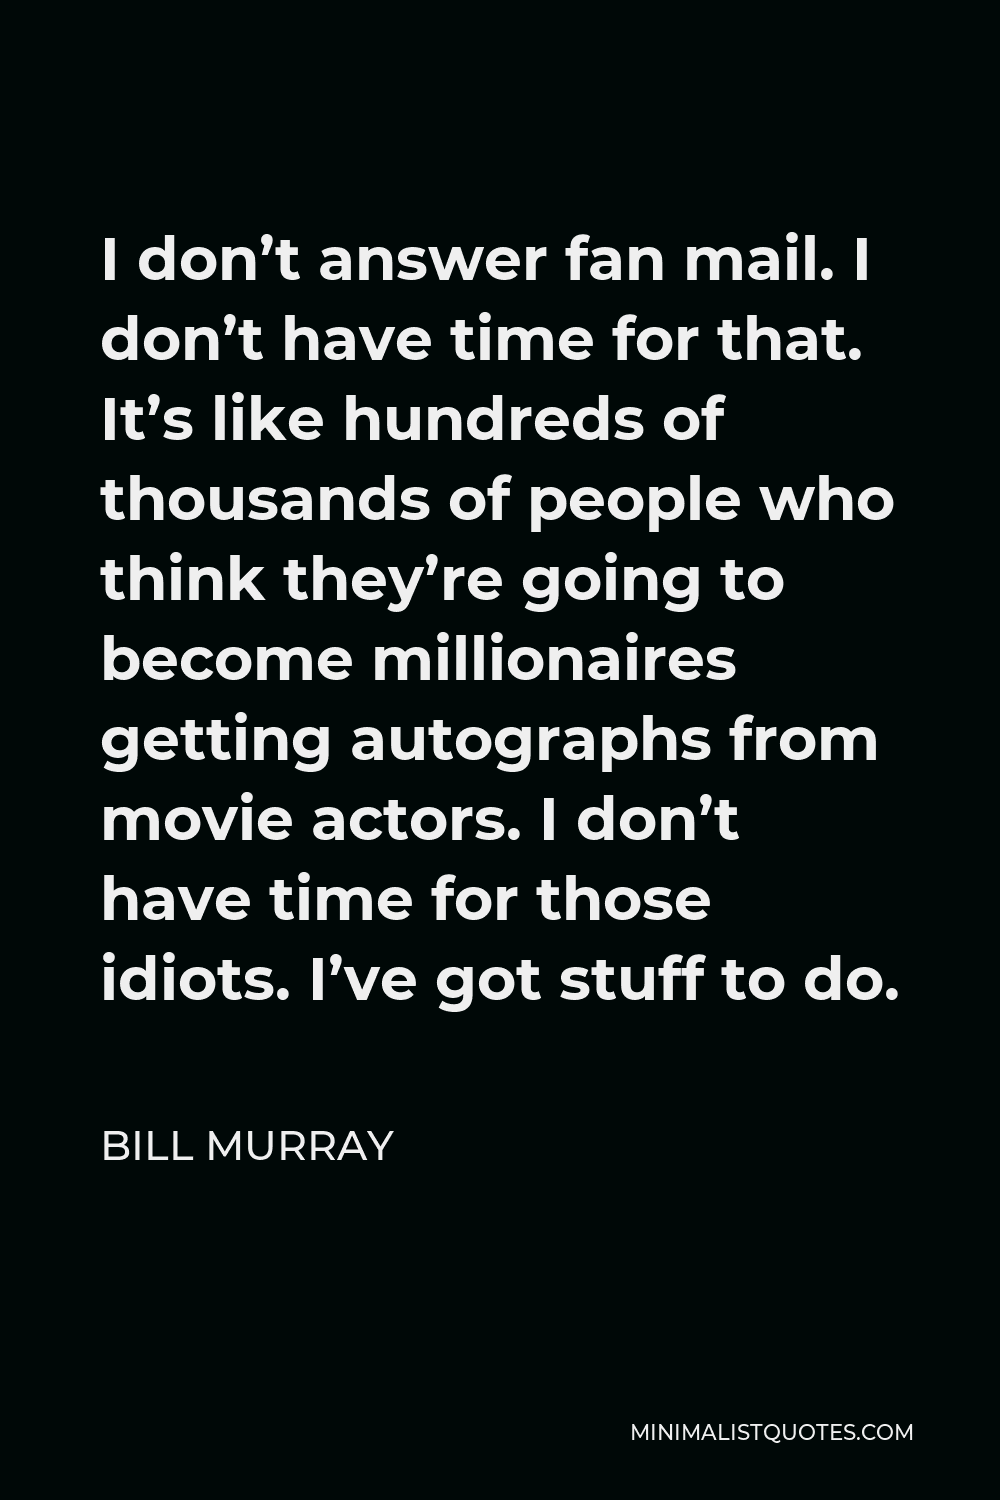 Bill Murray Quote - I don’t answer fan mail. I don’t have time for that. It’s like hundreds of thousands of people who think they’re going to become millionaires getting autographs from movie actors. I don’t have time for those idiots. I’ve got stuff to do.